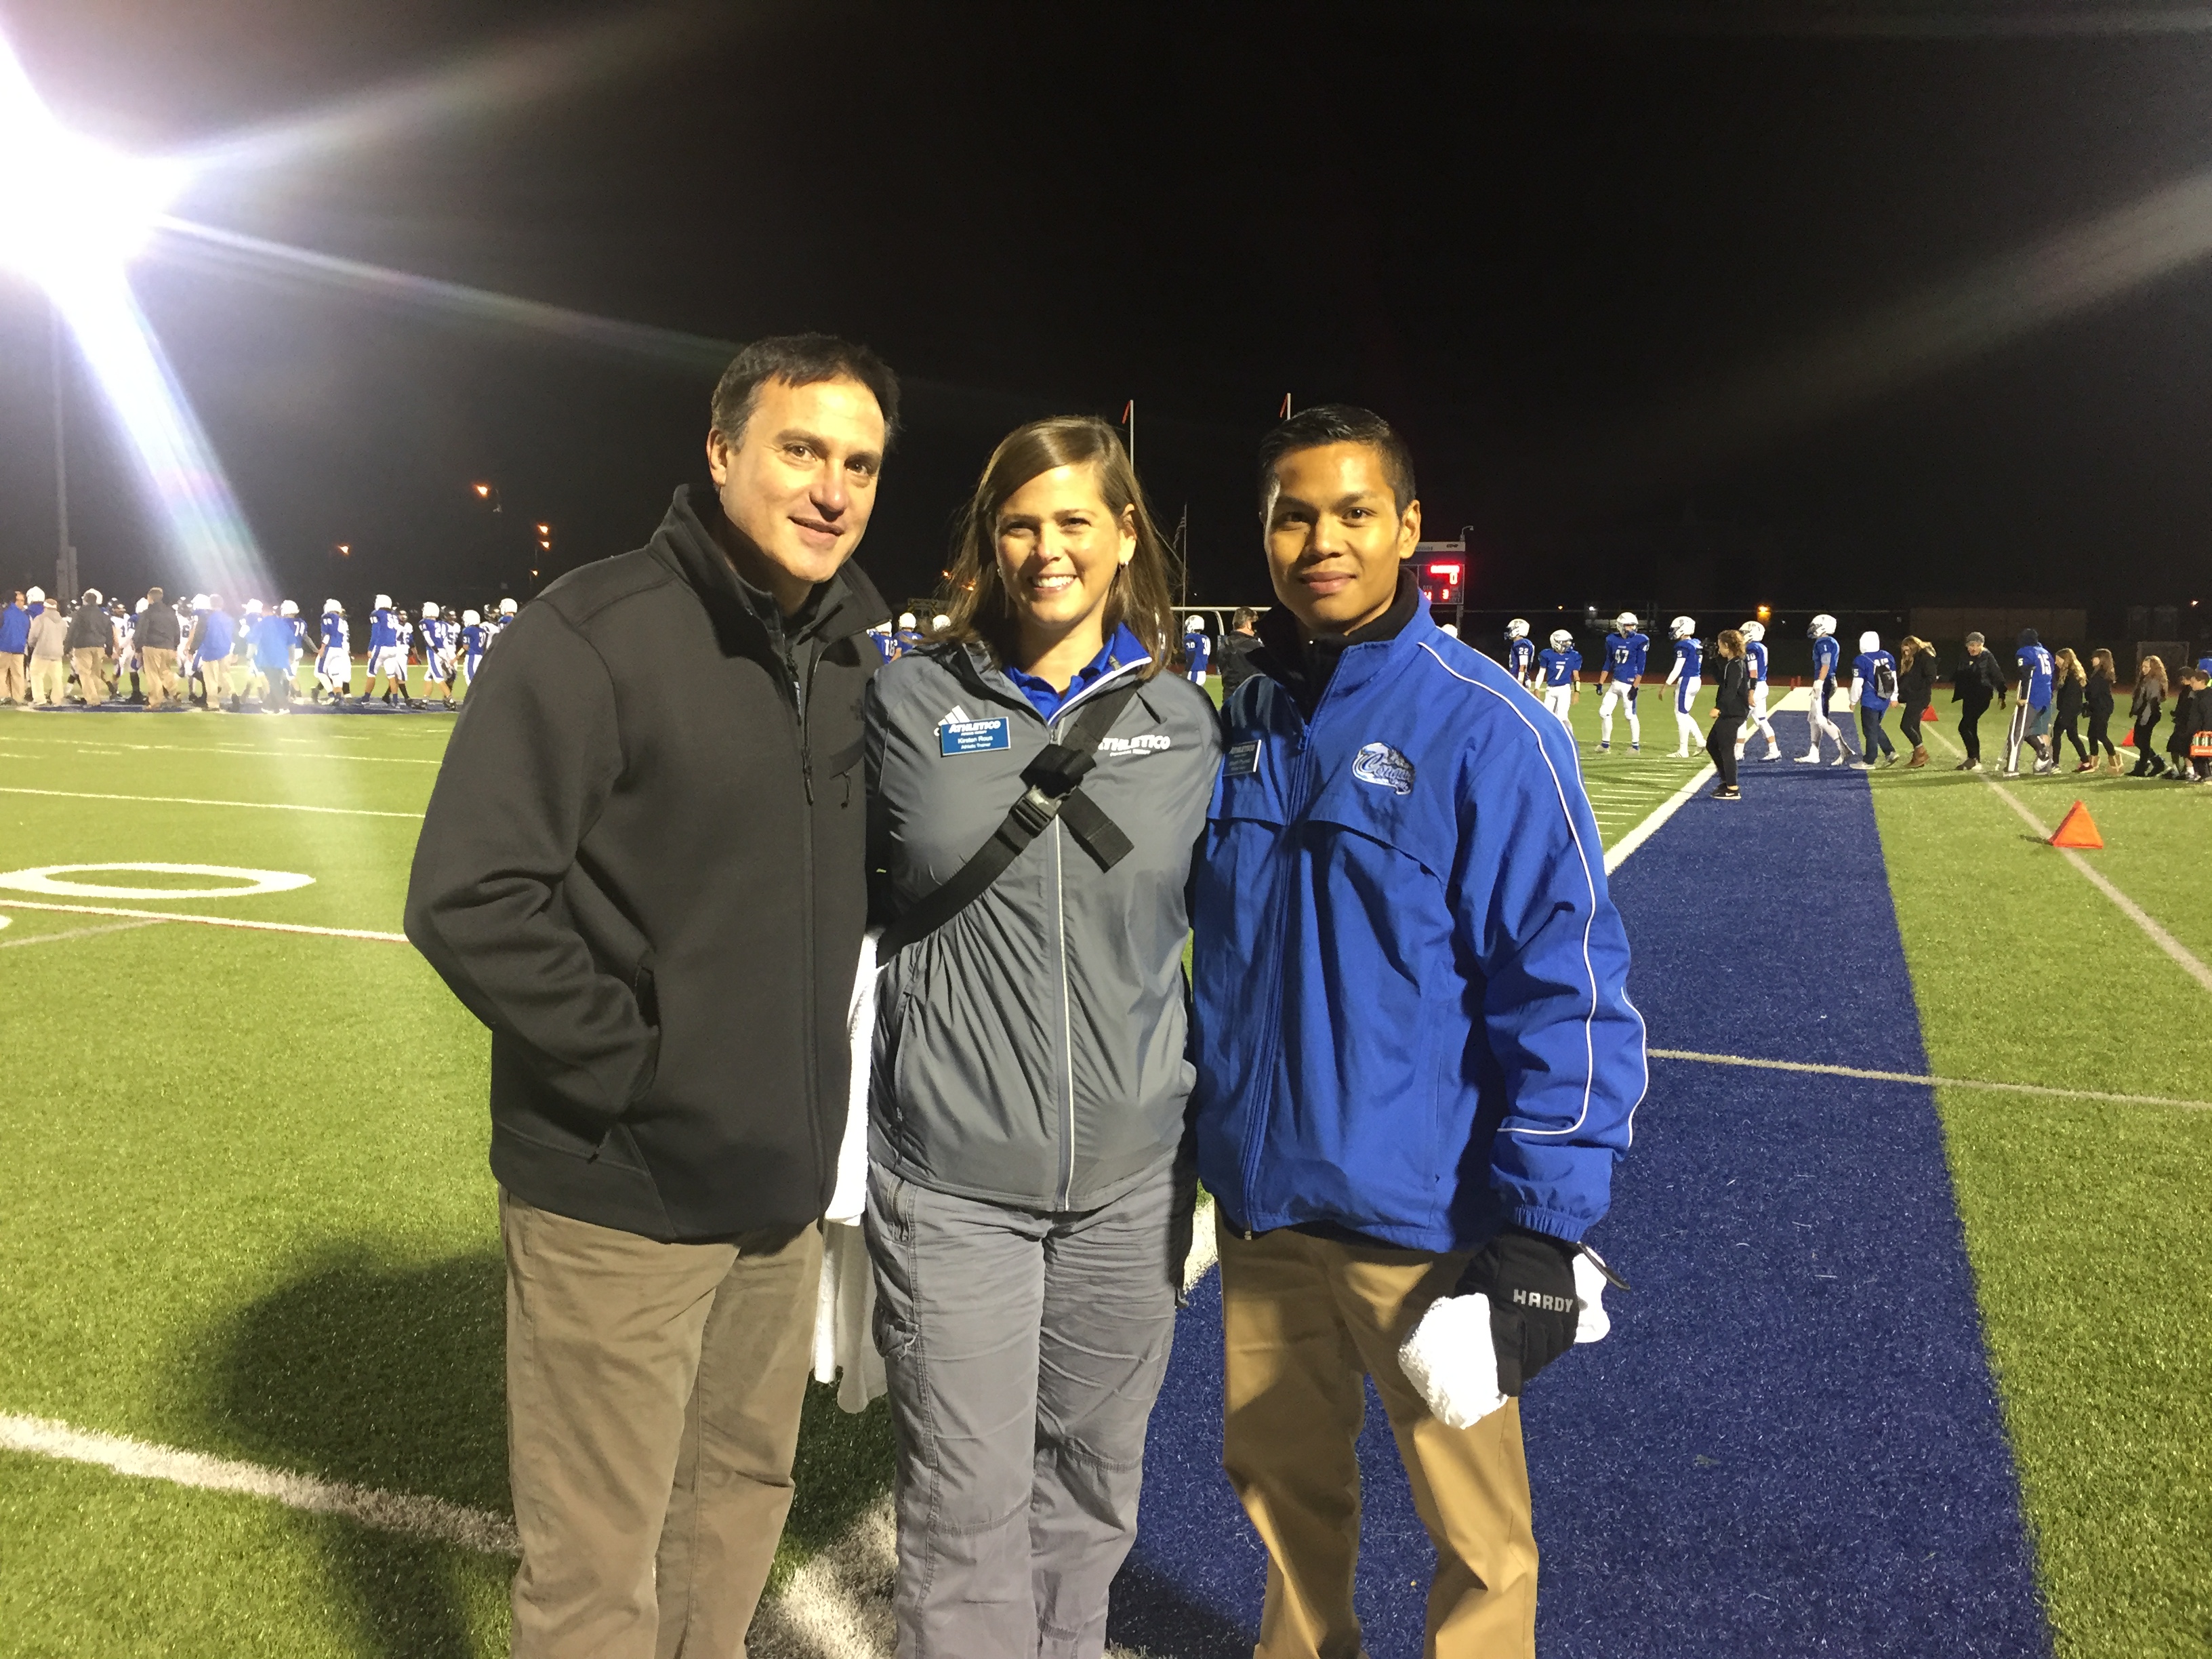 Dr. Roger Chams smiling standing with man and woman on football field at night